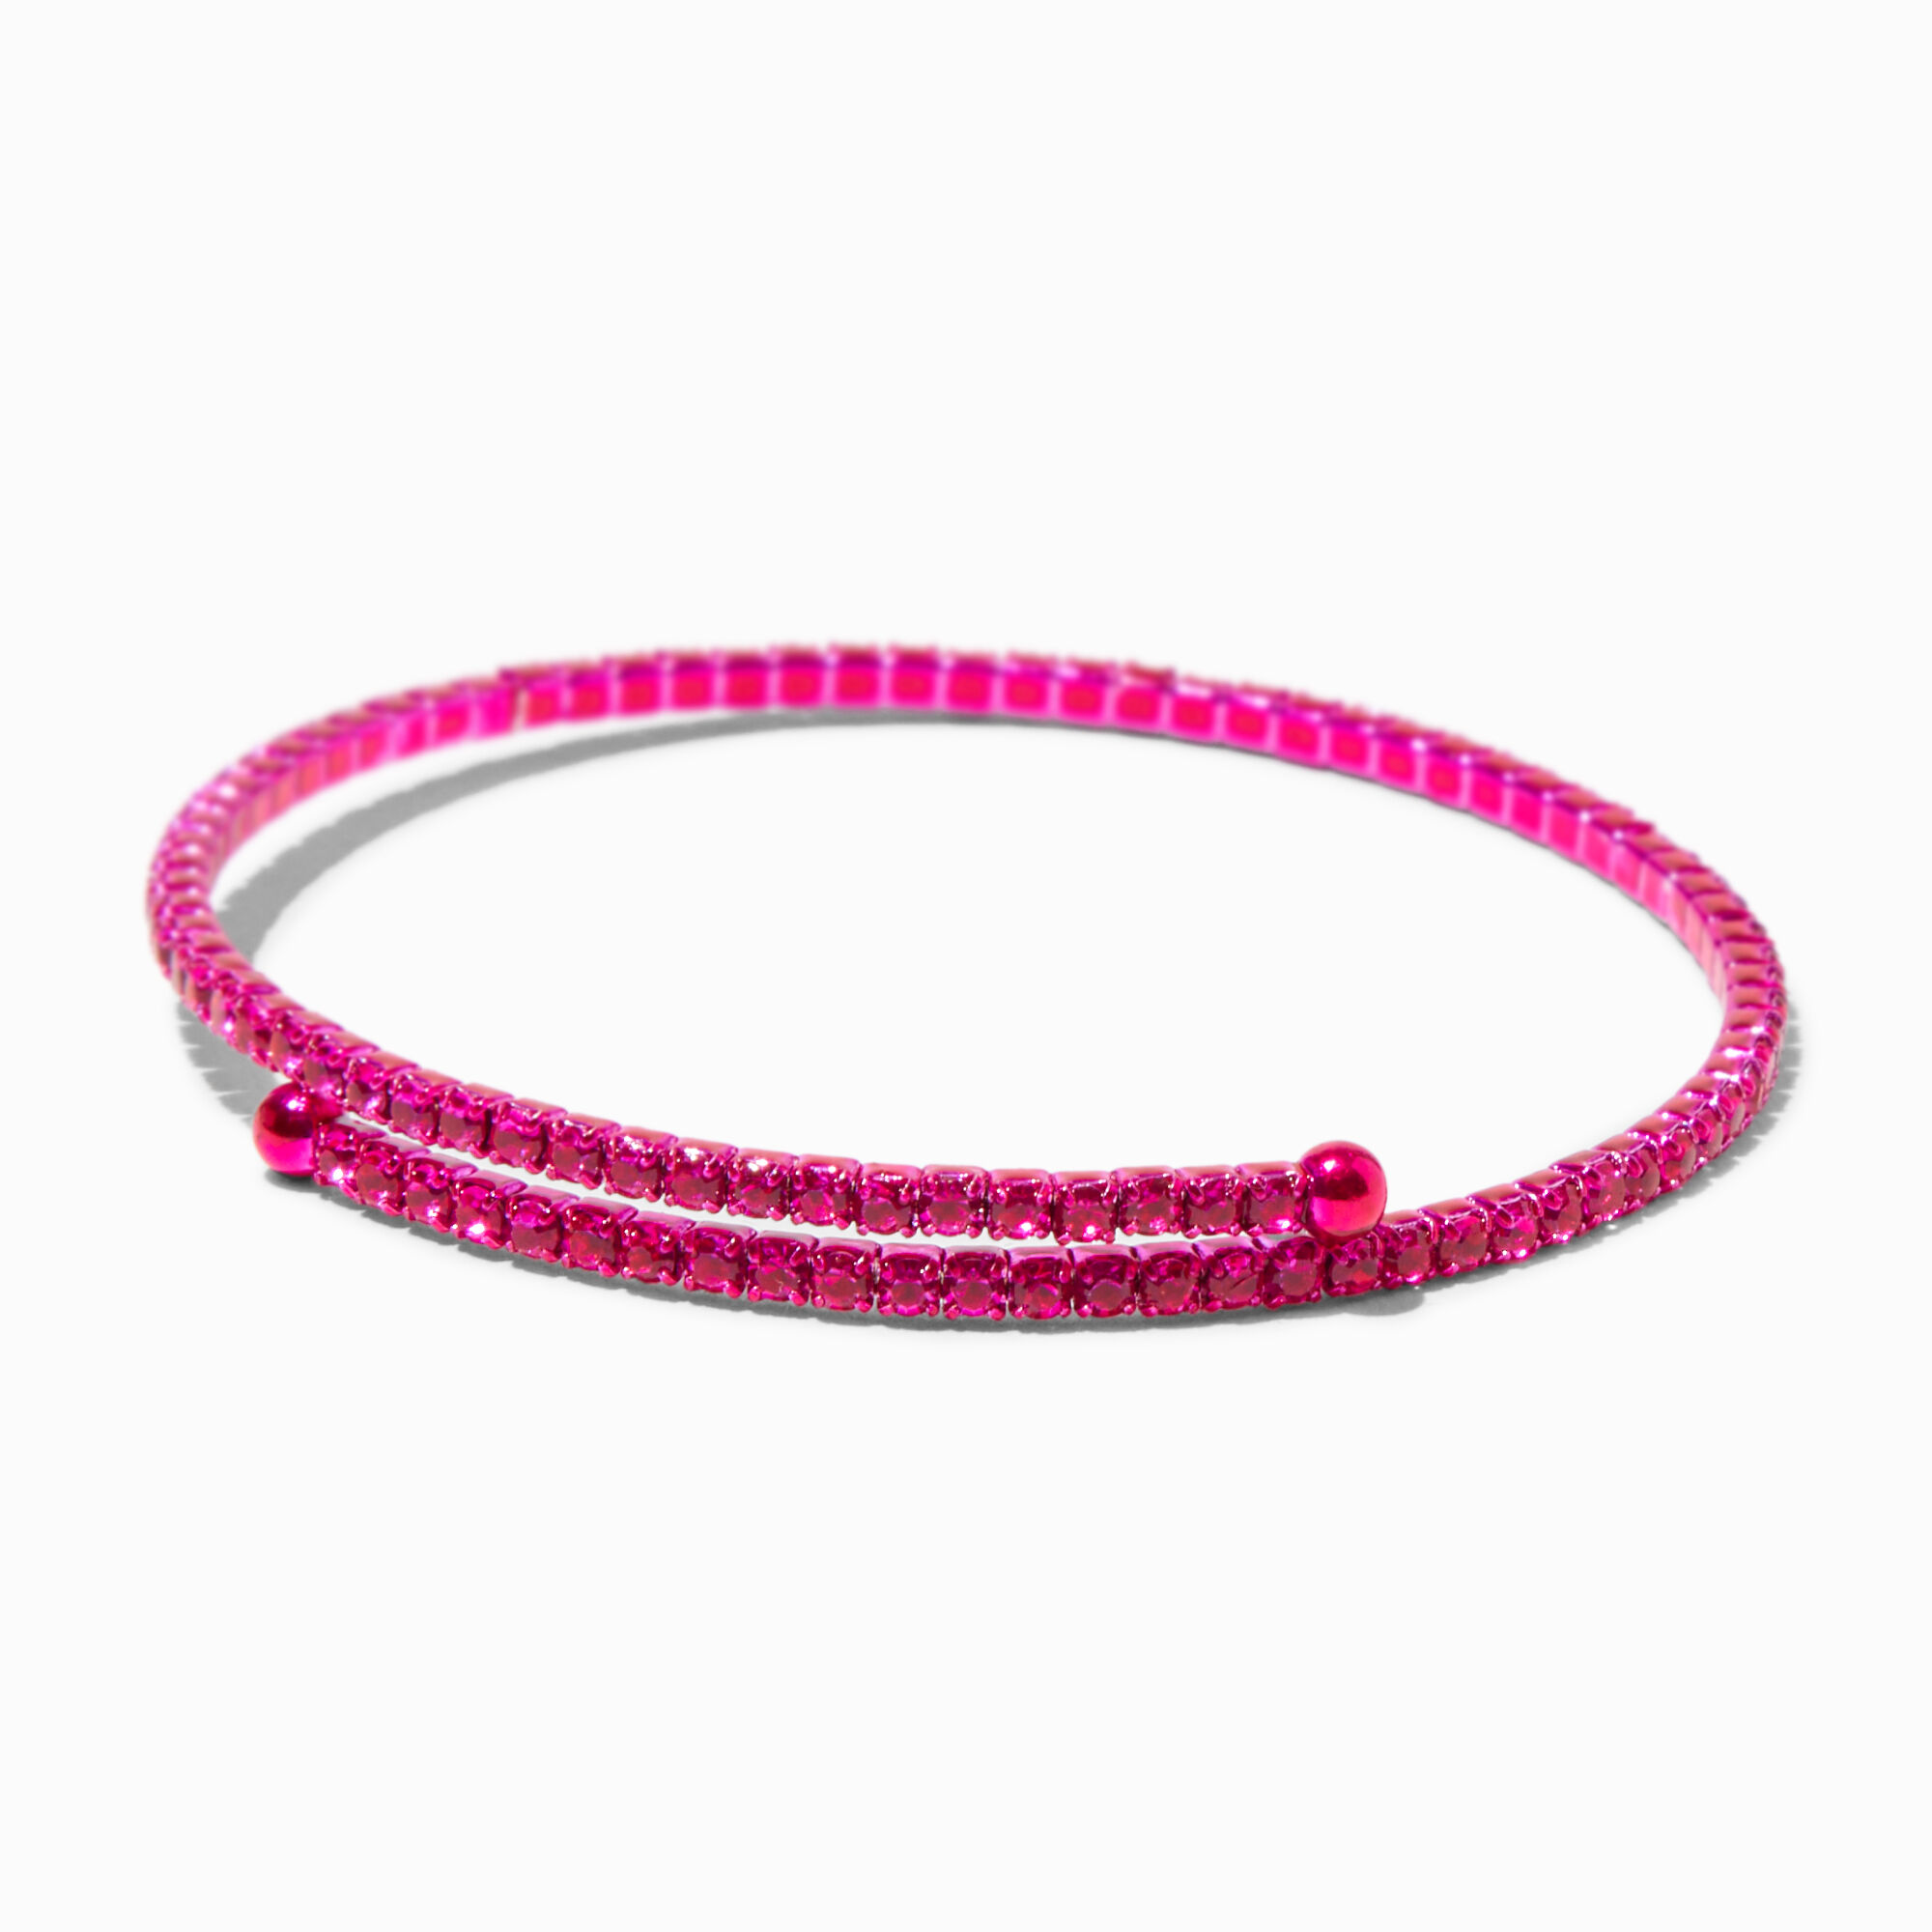 View Claires Crystal Anodized Bangle Bracelet Fuchsia information